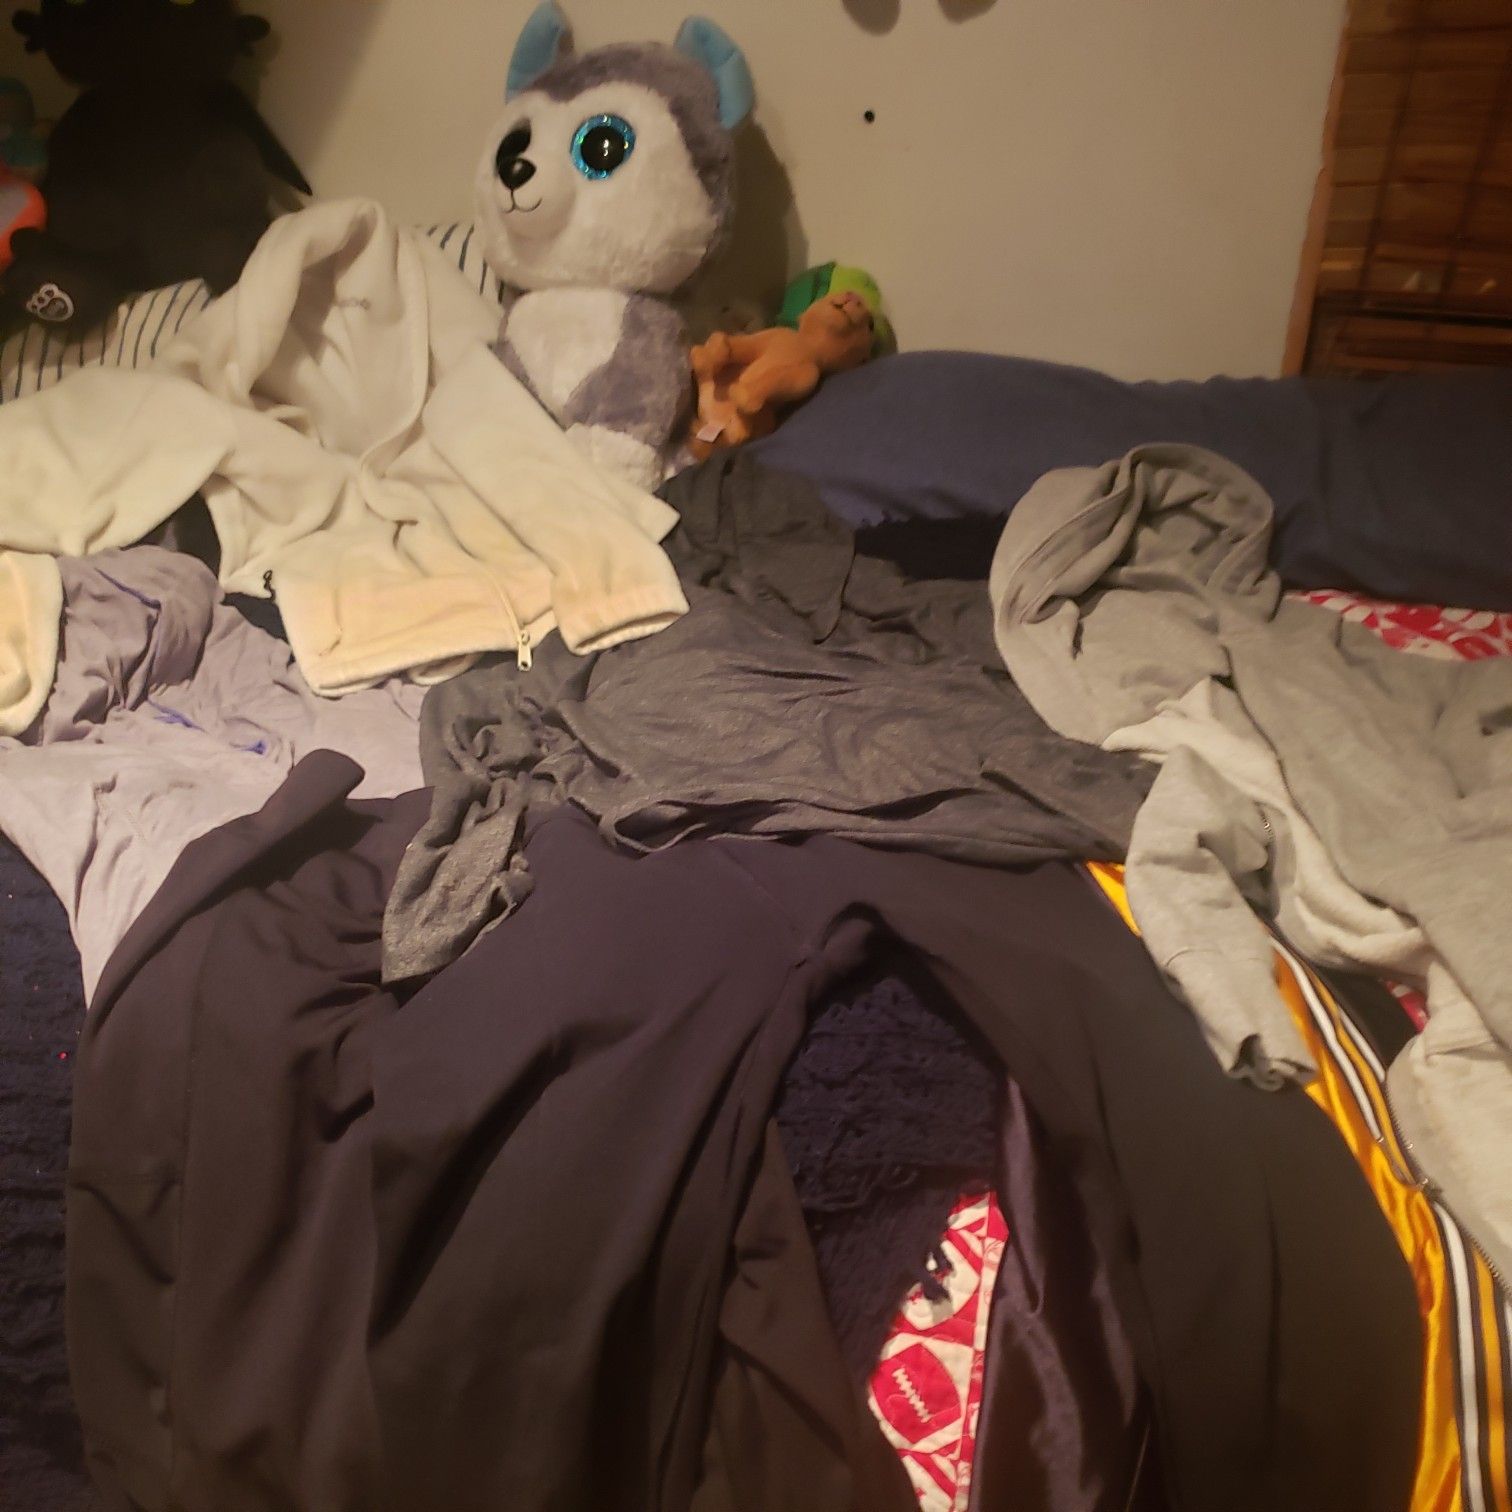 Free S workout outfits and larger sze dress and other